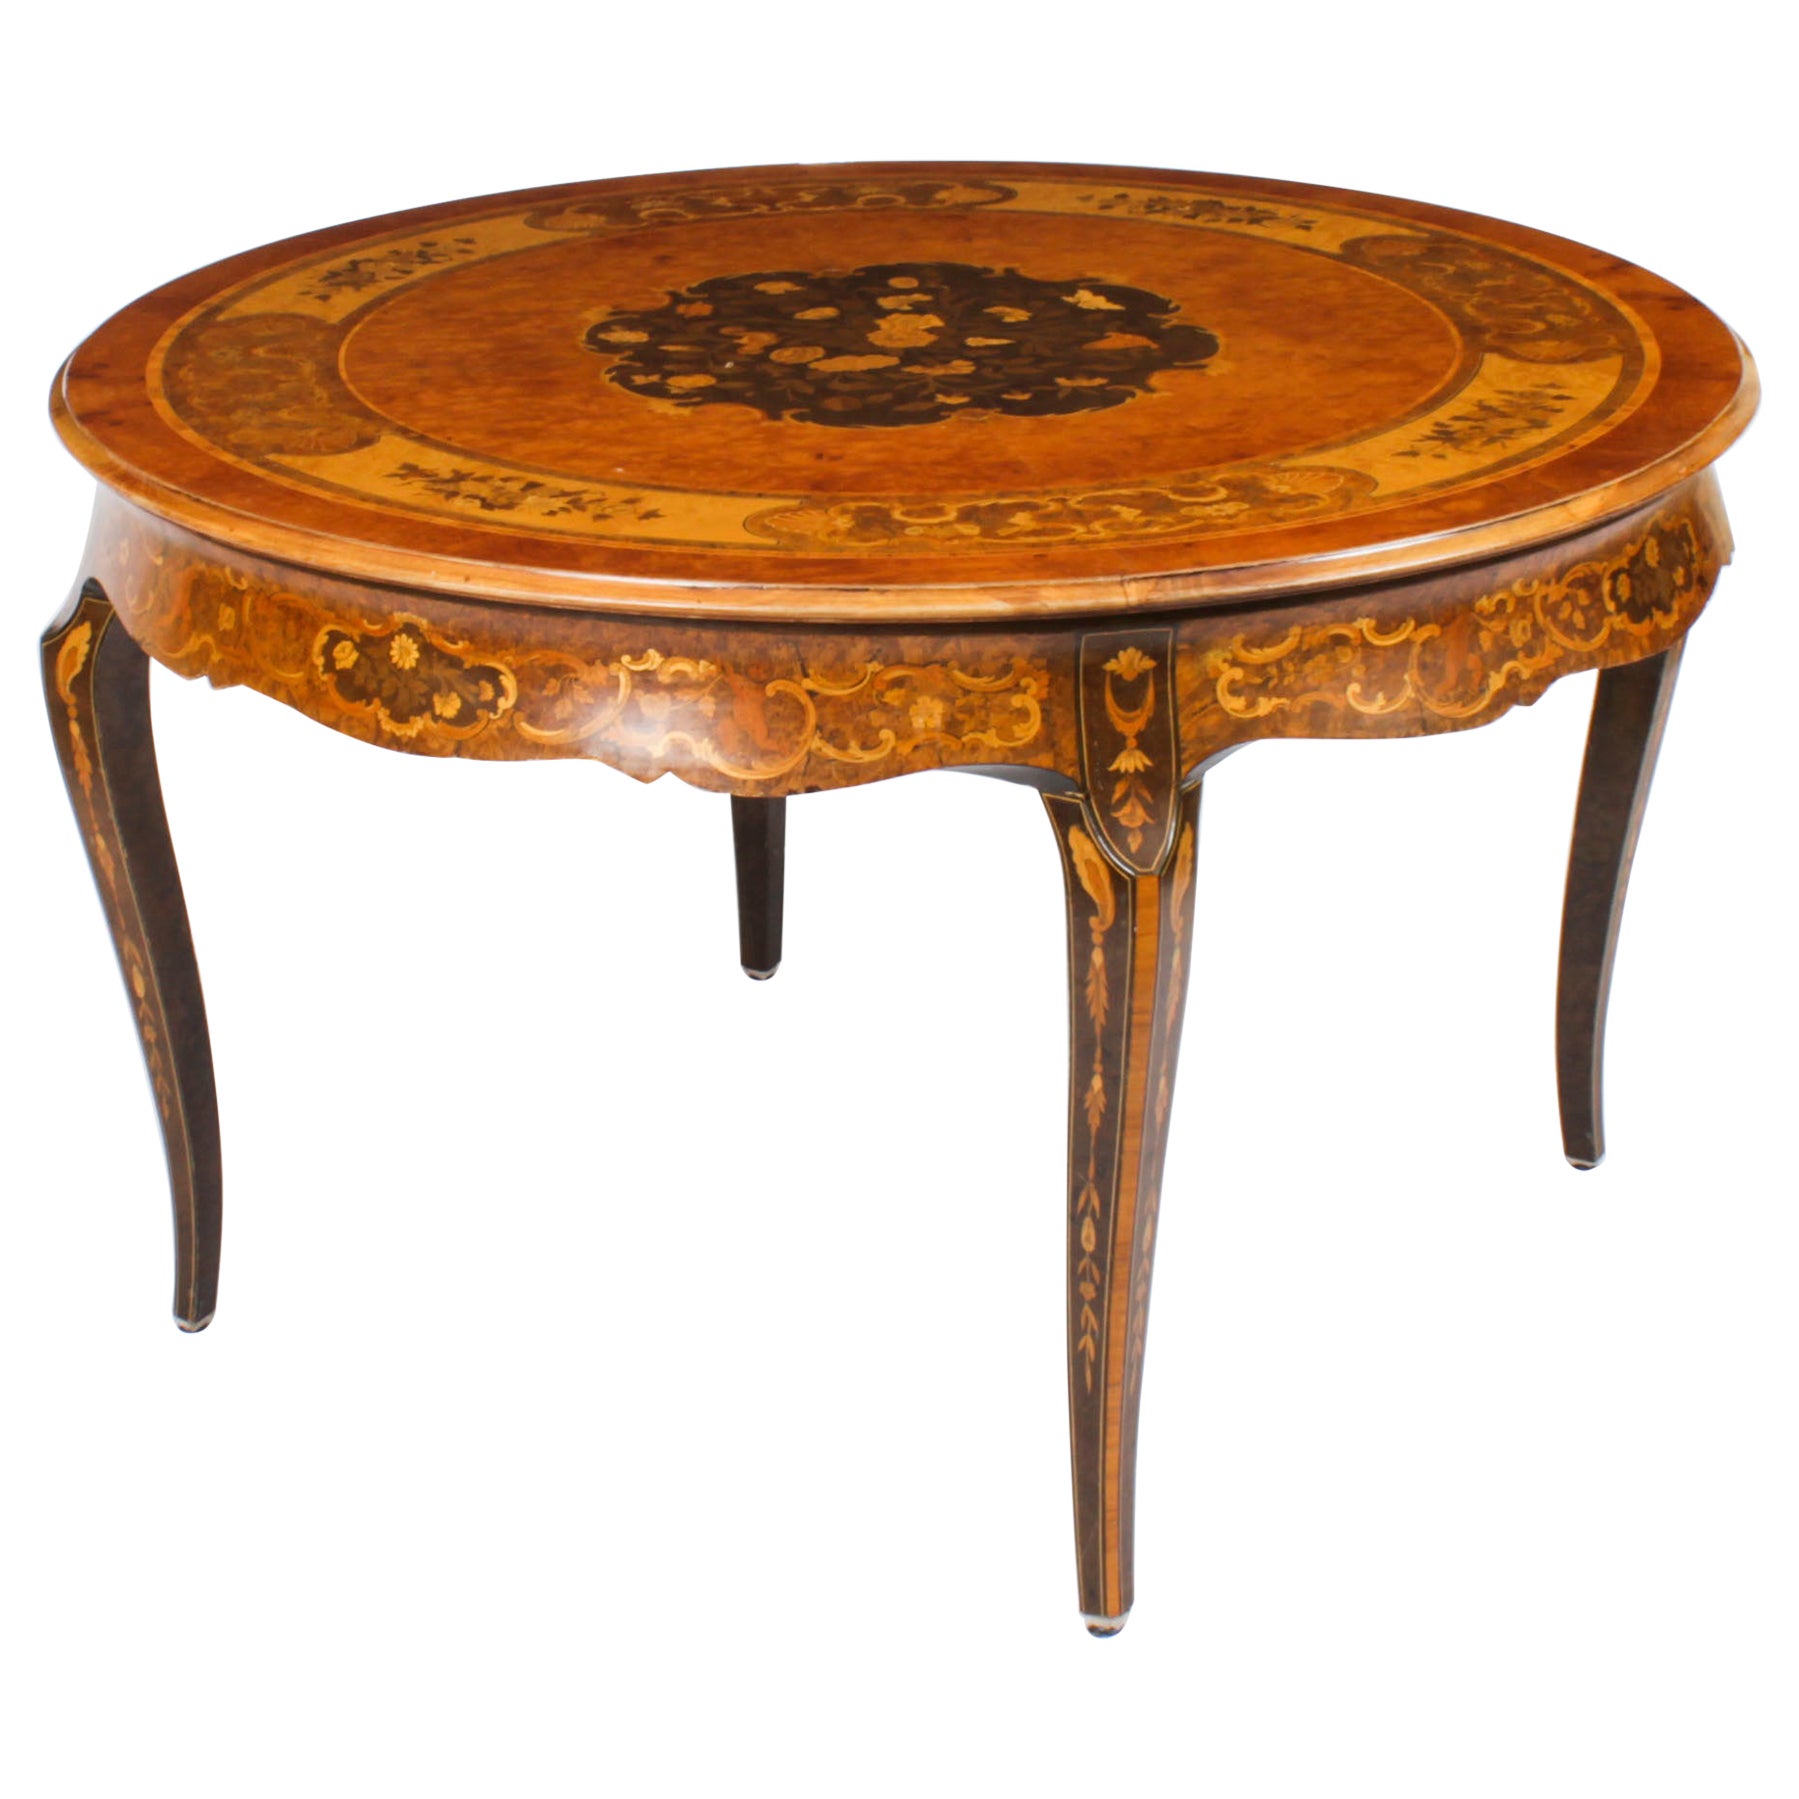 Antique Burr Walnut Marquetry Centre / Dining Table, Early 20th Century For Sale